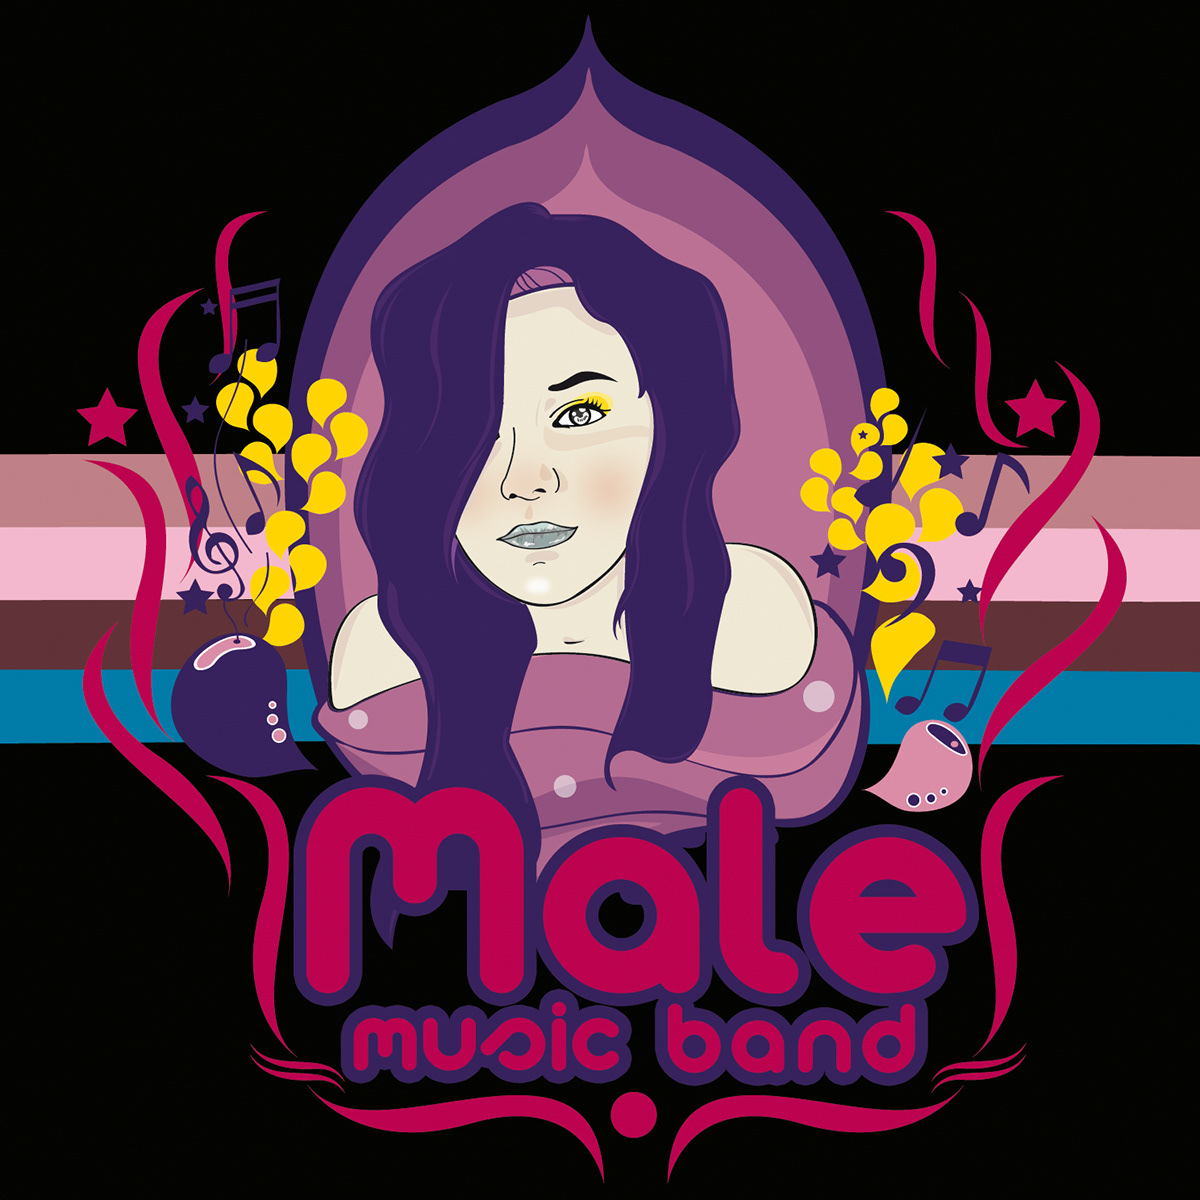 cover music male band digital notes purple girl woman